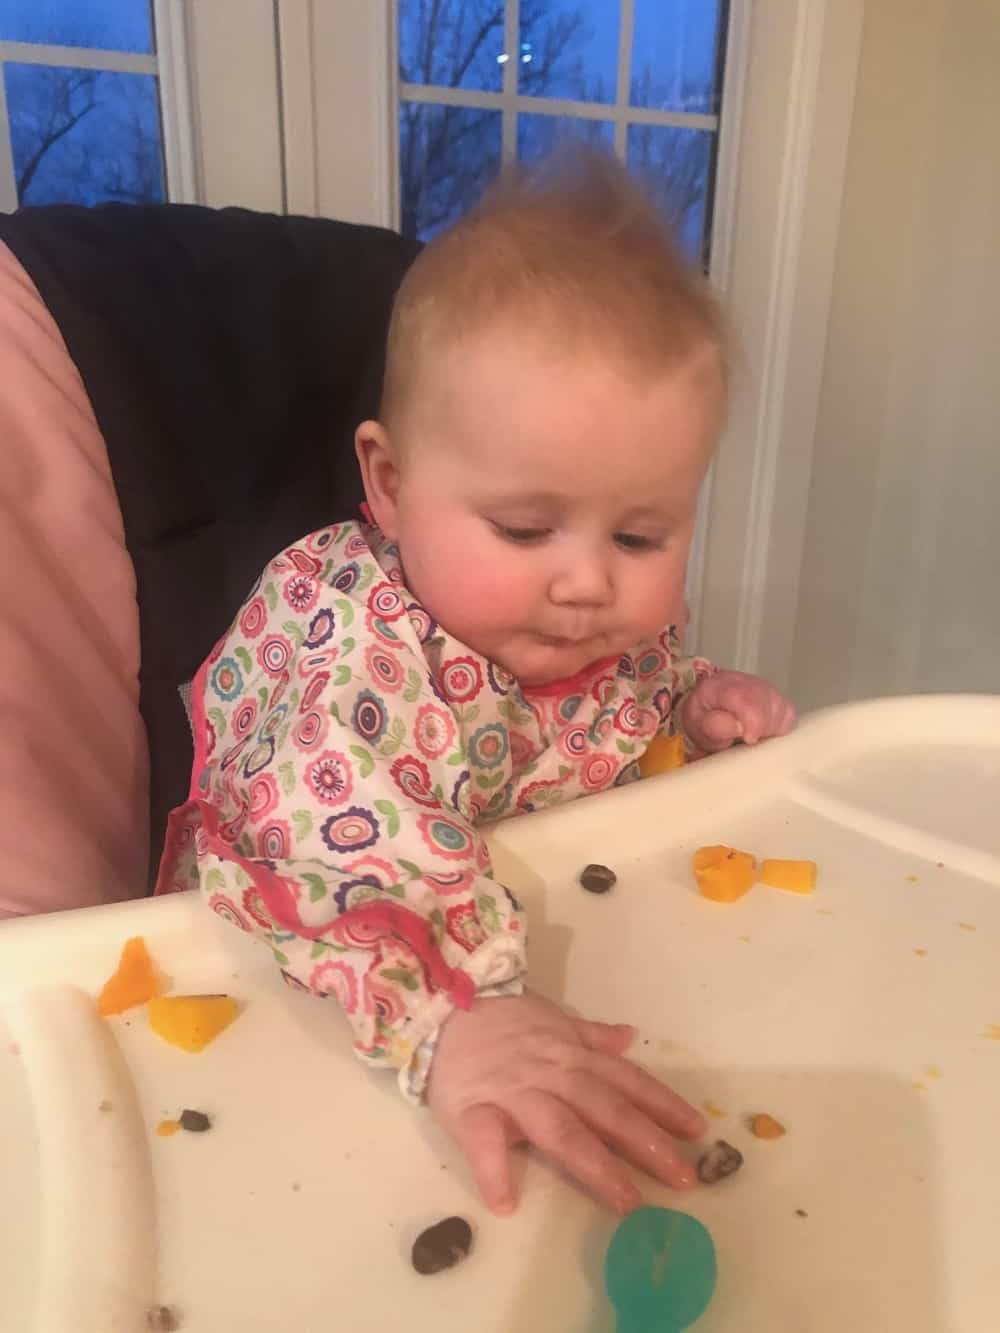 baby wearing long sleeved bib eating solids at high chair